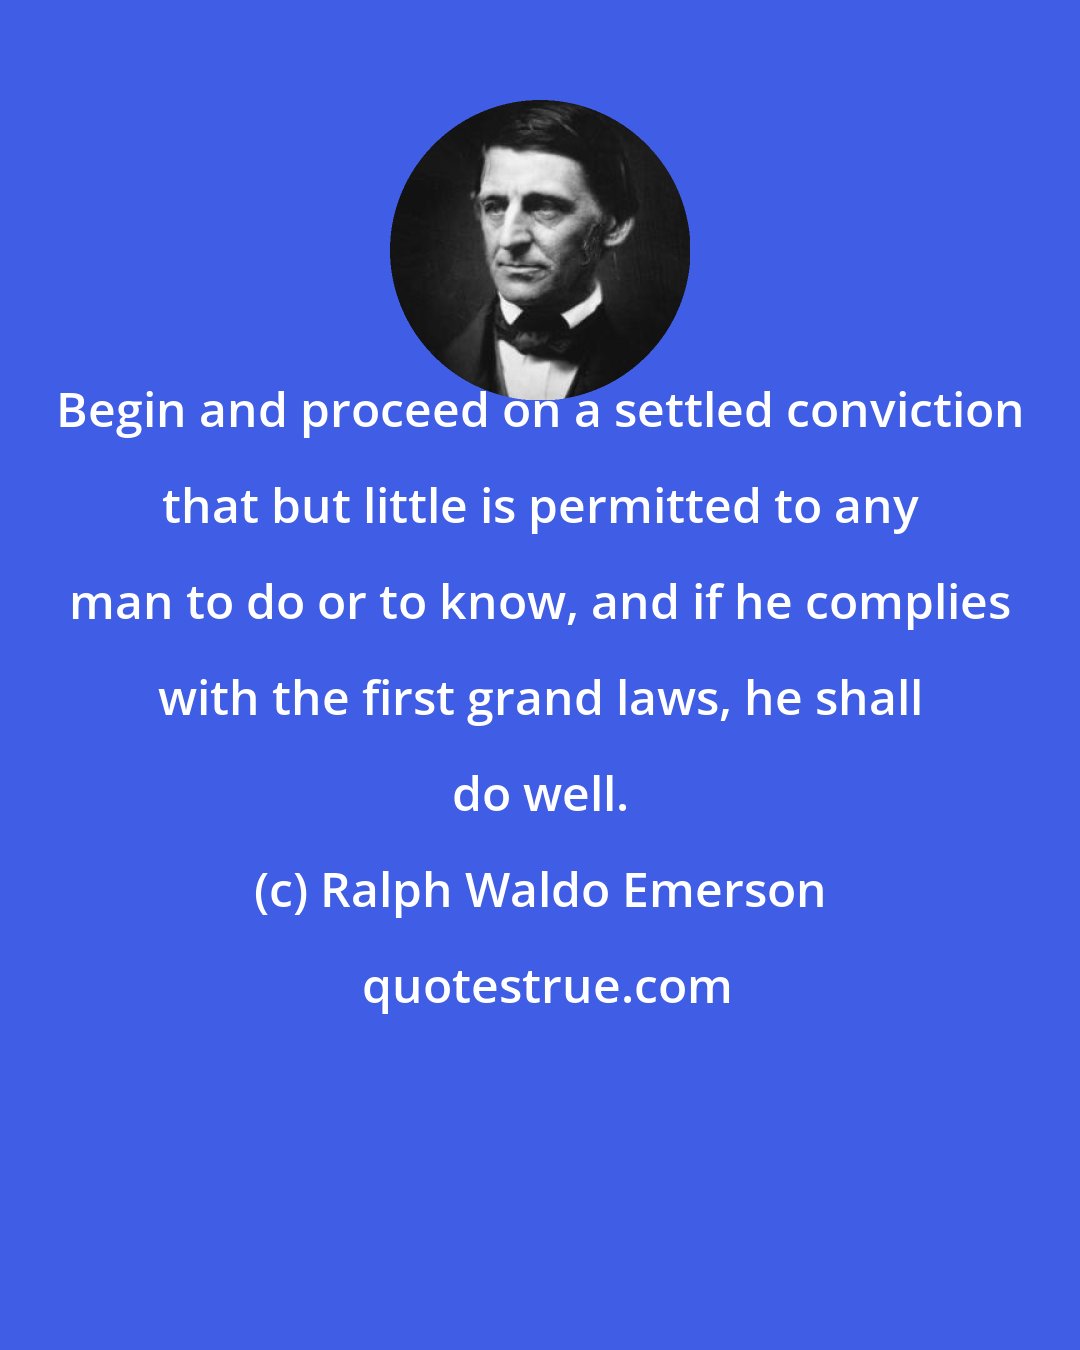 Ralph Waldo Emerson: Begin and proceed on a settled conviction that but little is permitted to any man to do or to know, and if he complies with the first grand laws, he shall do well.